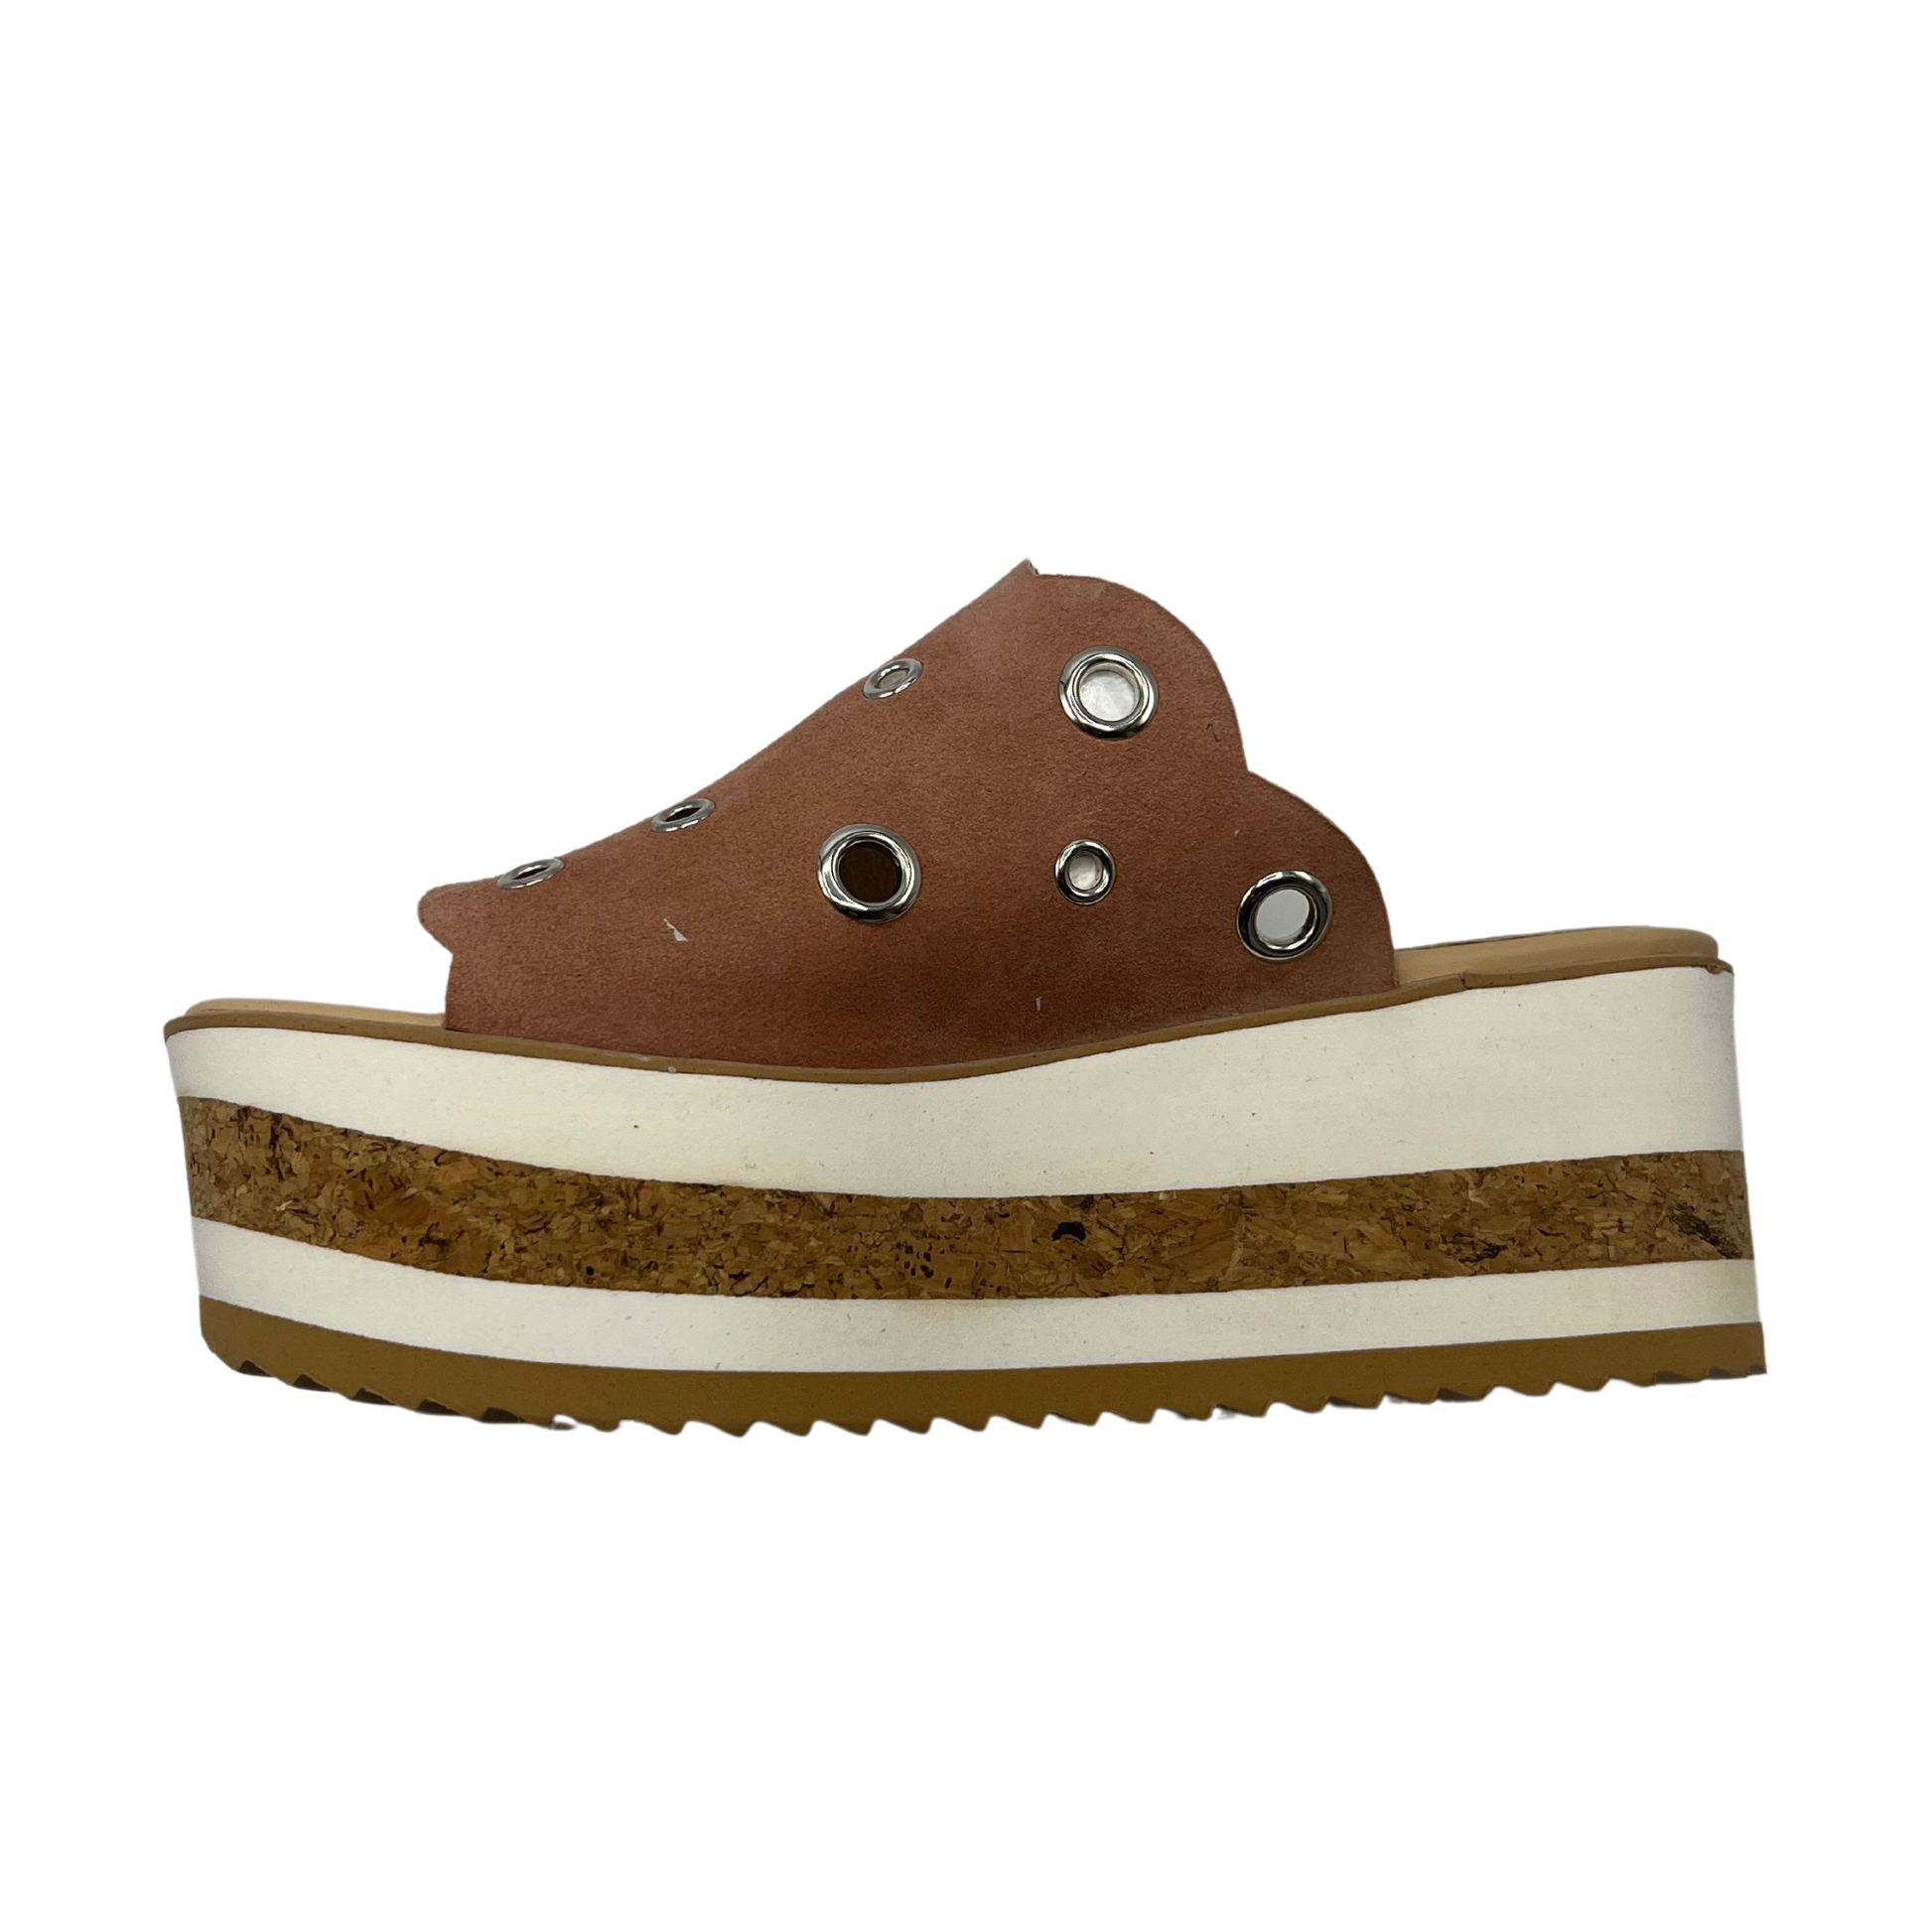 A left view of a brown suede platform slide with circular cutouts.